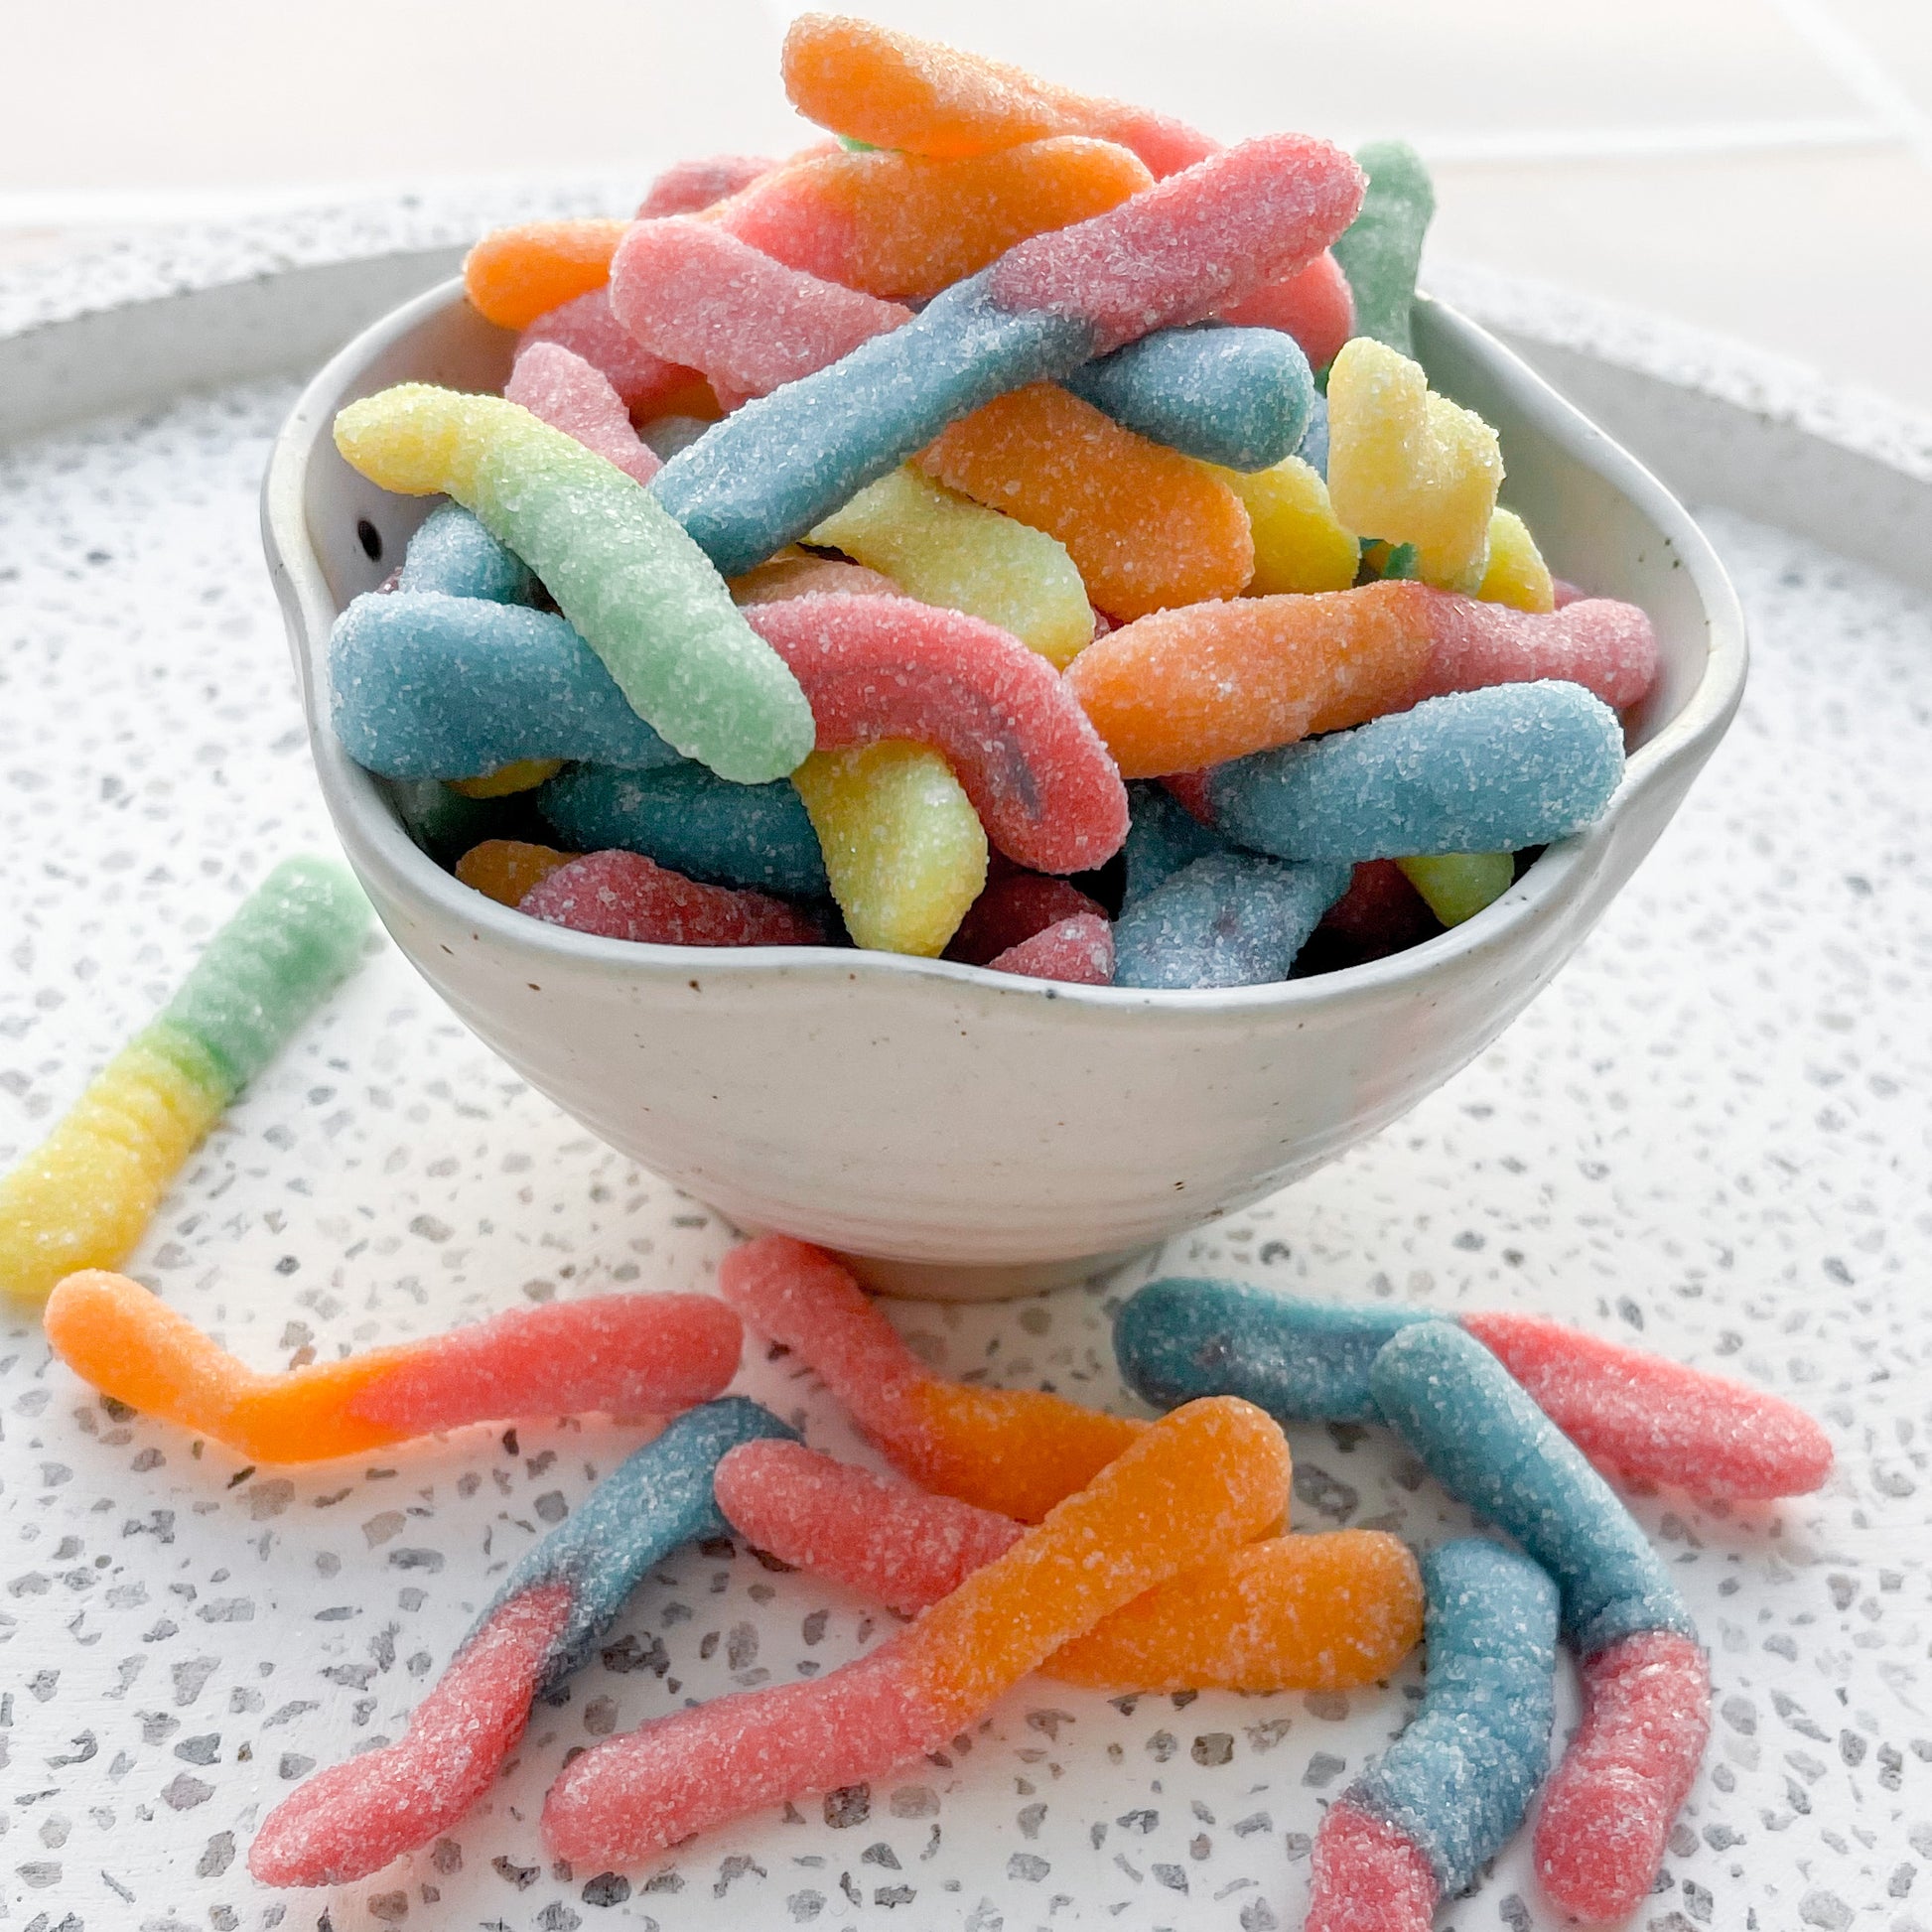  Sour Worms Before Being Freeze Dried